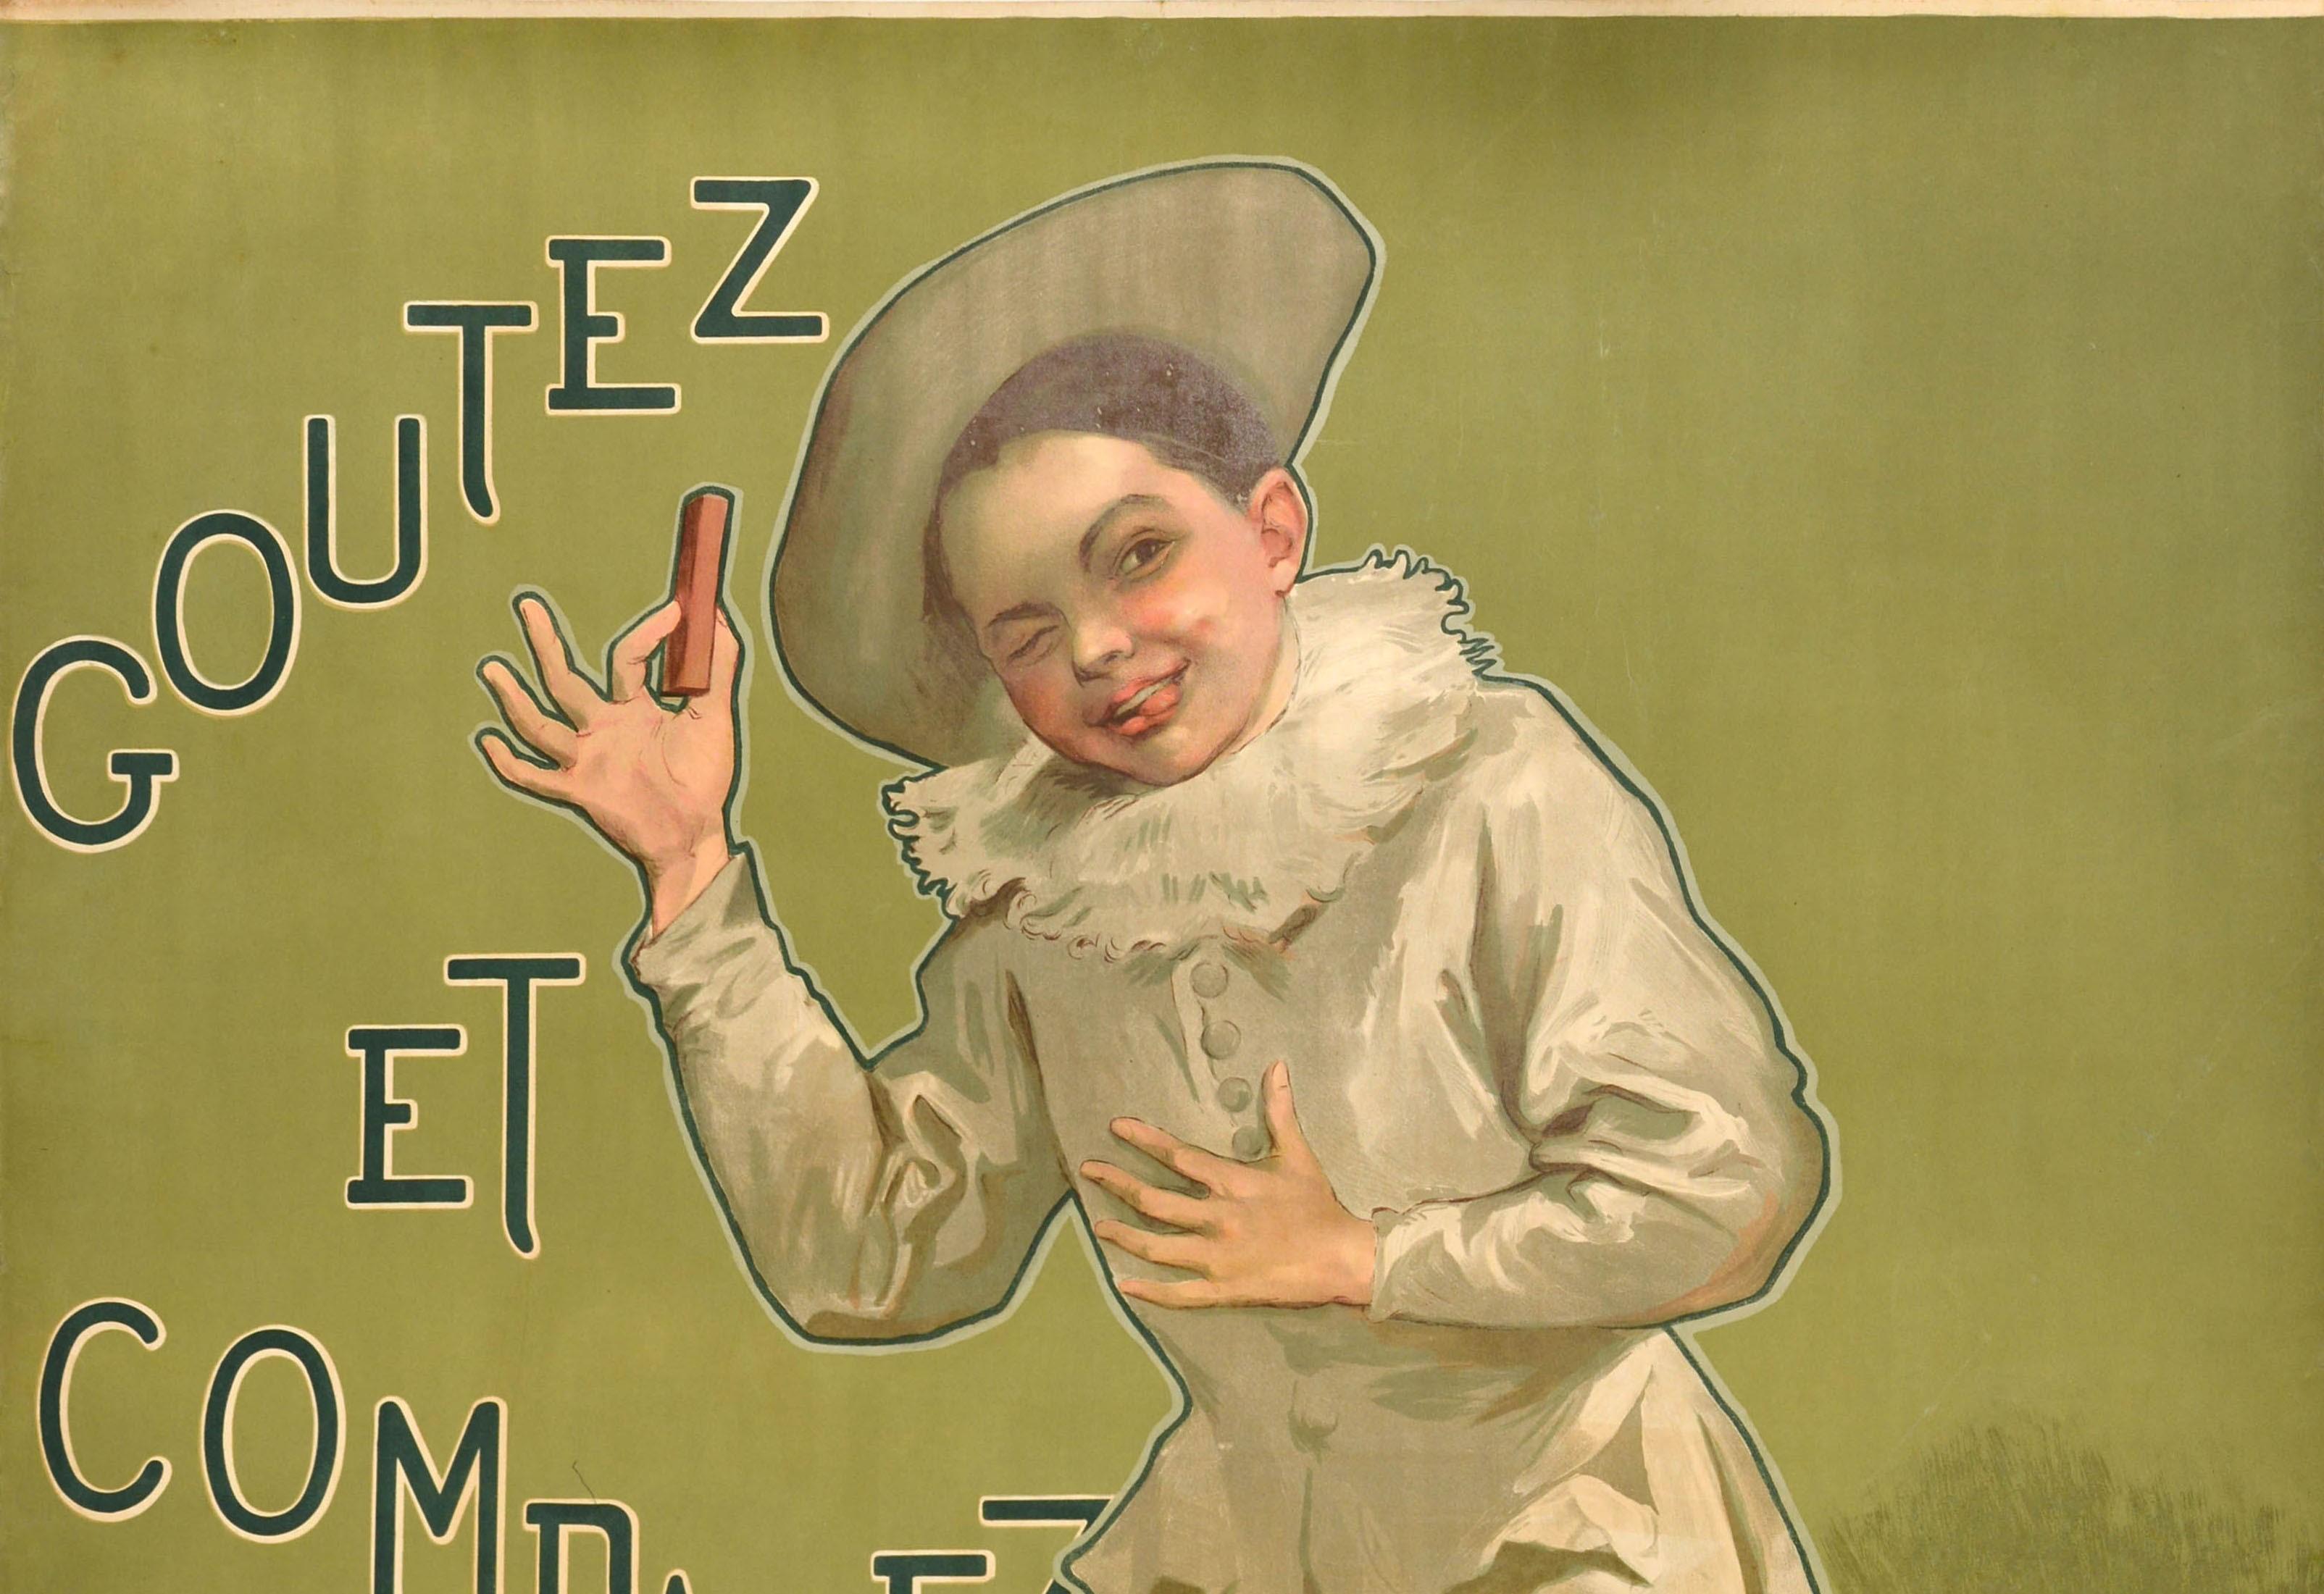 Original antique food advertising poster for Chocolat Poulain Goutez et compare / Taste and Compare featuring an illustration of a young boy in white clothing wearing a hat with bows on his shoes mischievously sticking his tongue out and winking to